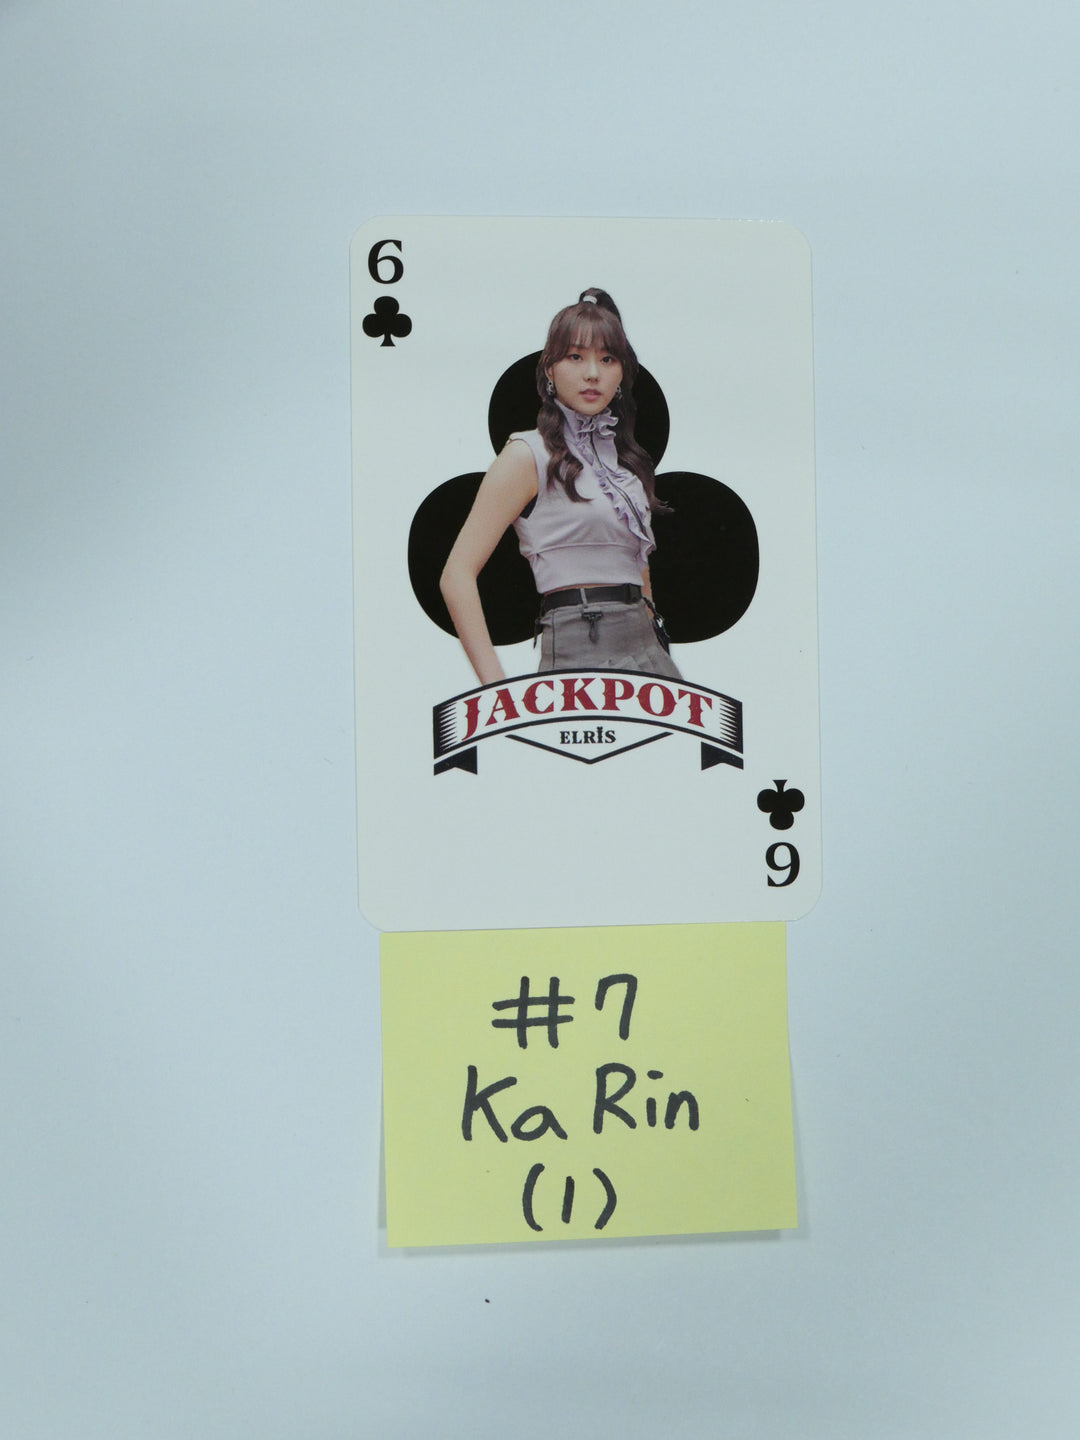 Elris 'Jackpot' - Official Photocard